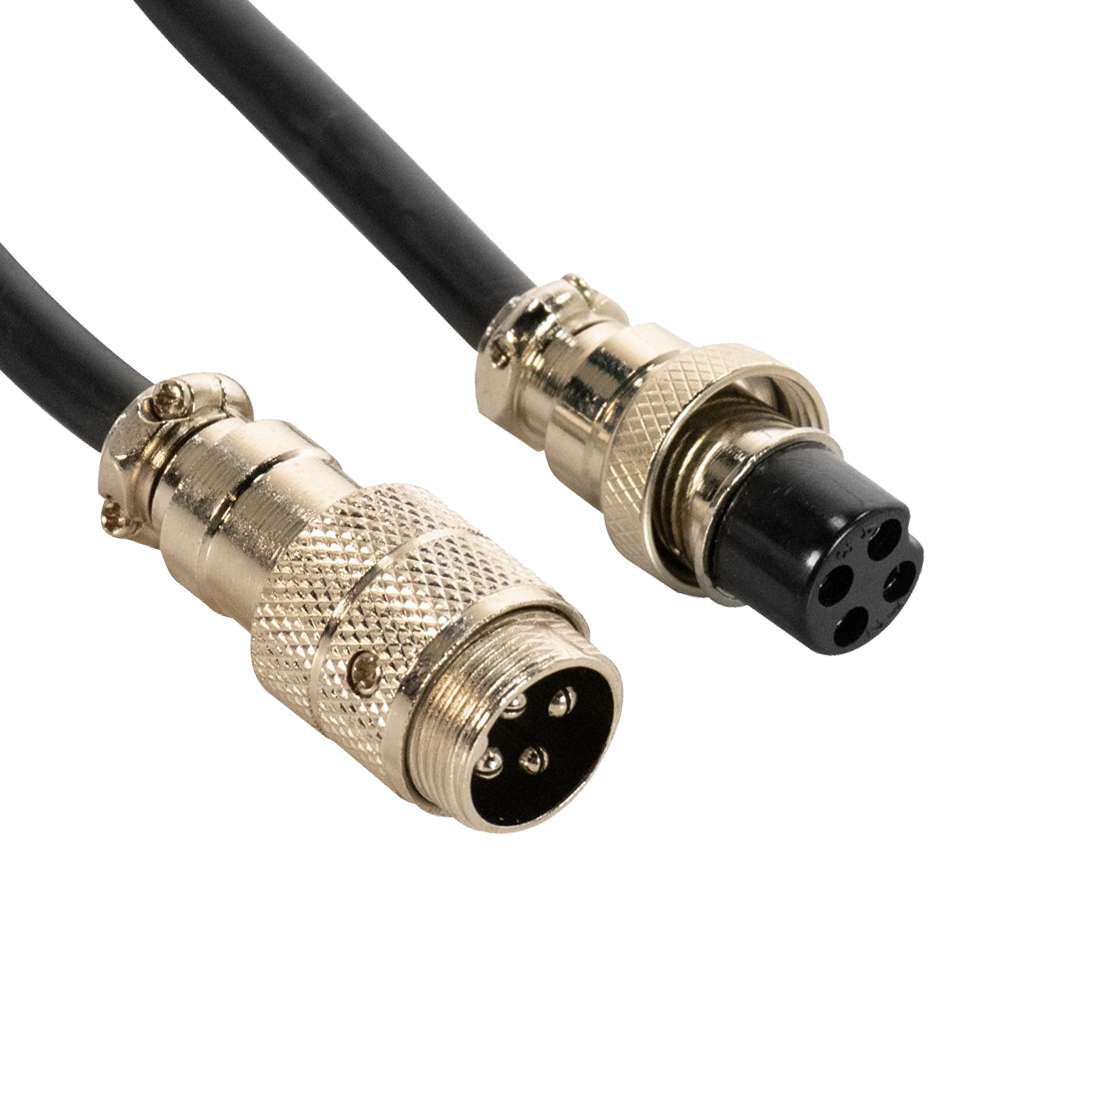 Extension Cable LED Pixel Tube 360 10m